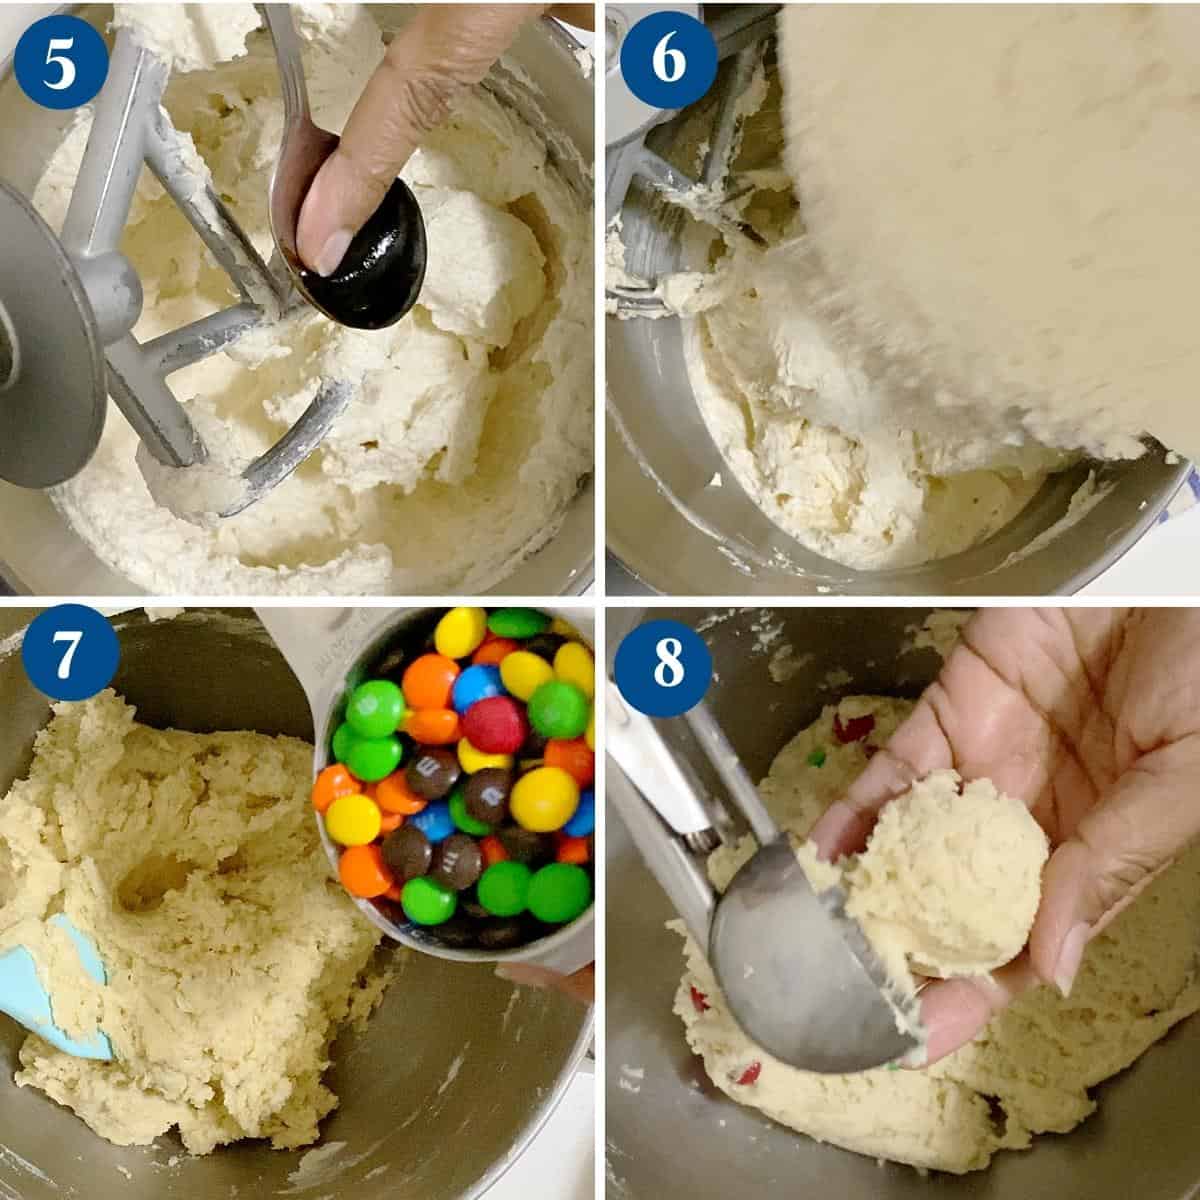 Progress pictures making the cookies with M&M candy.